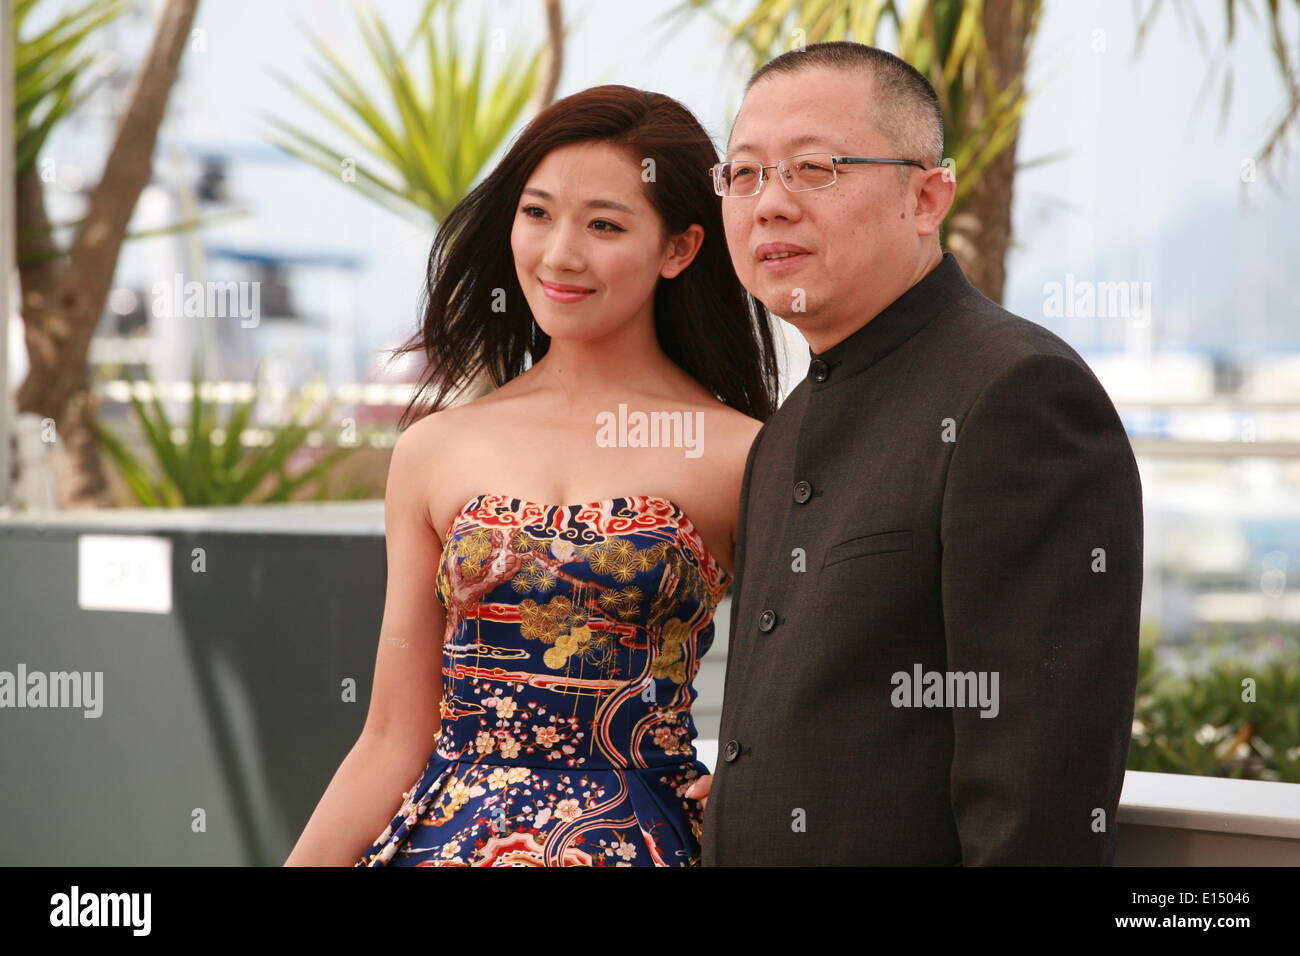 Cannes, France. 21st May, 2014. Jian RenZi and Chao Wang at the photo call for the film Fantasia at the 67th Cannes Film Festival, Wednesday 21st  May 2014, Cannes, France. Credit:  Doreen Kennedy/Alamy Live News Stock Photo